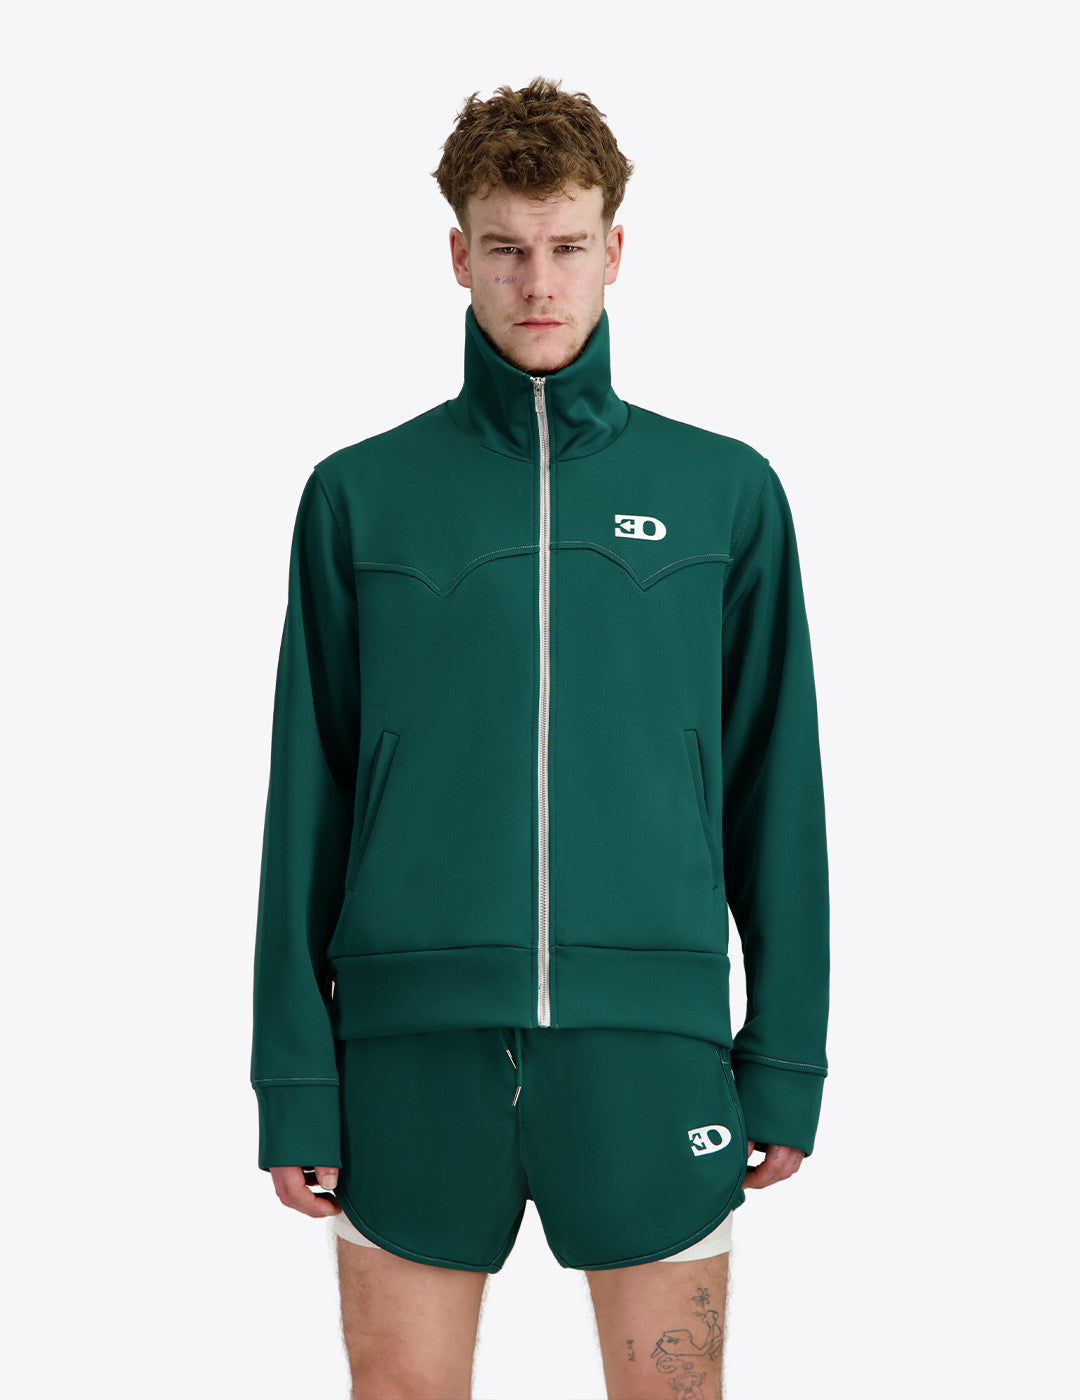 THE 70S TRACK TOP IN GREEN